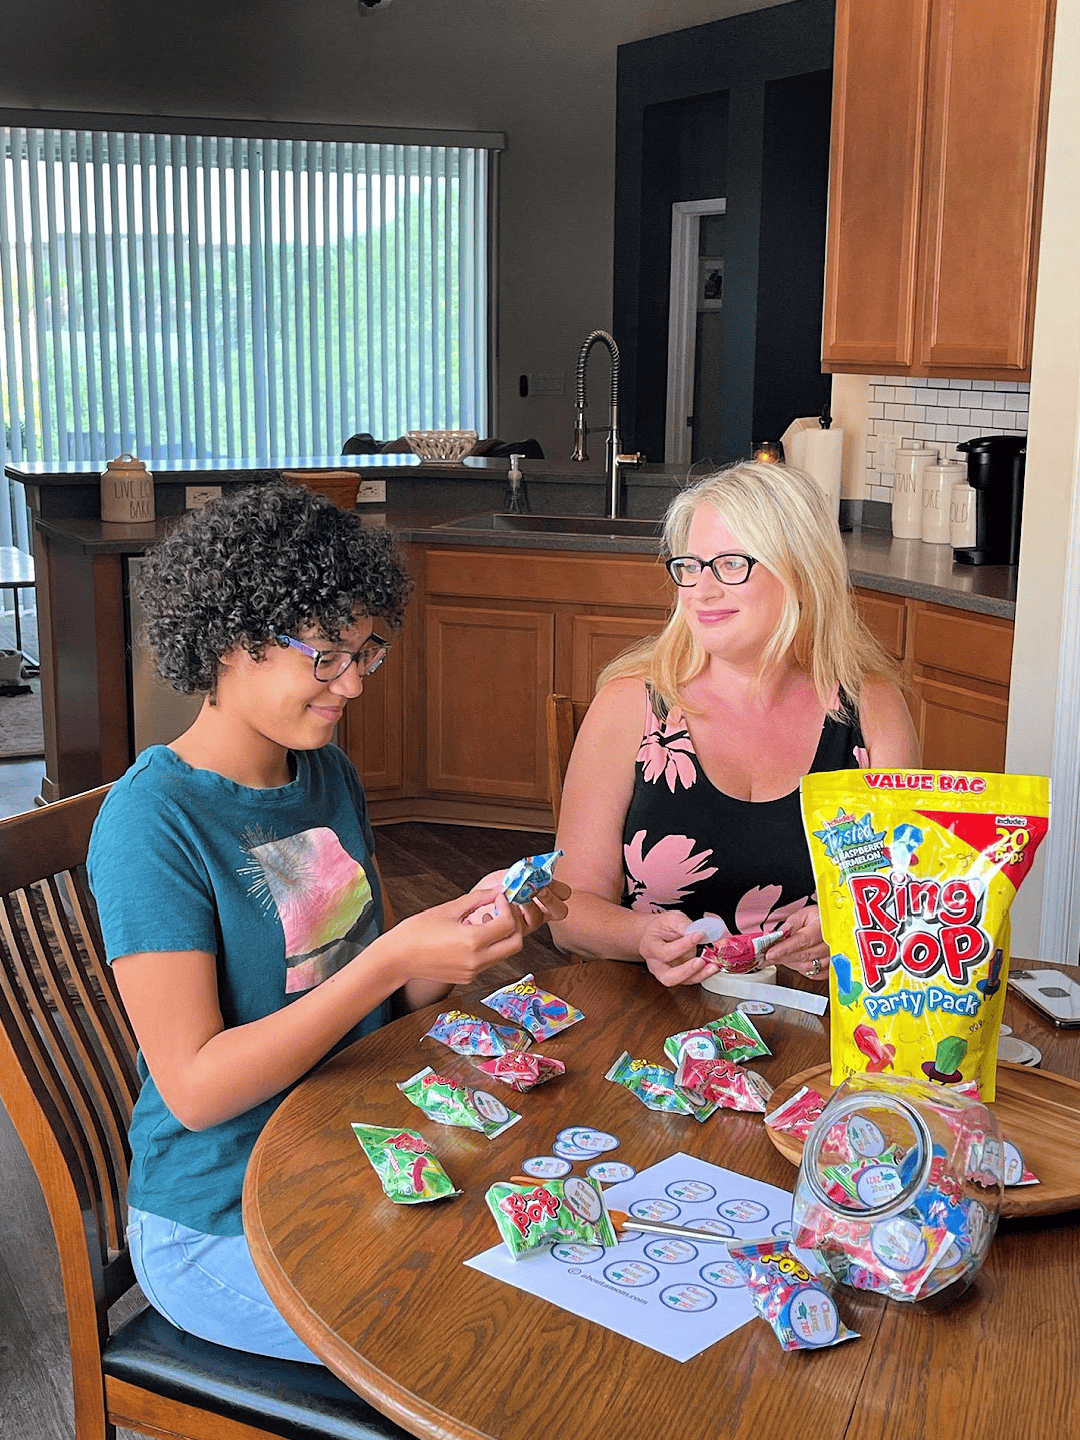 Celebrate the end of the school year with a fun graduation craft project. Make a sweet Ring Pop Class Ring with your kids plus a DIY graduation centerpiece.